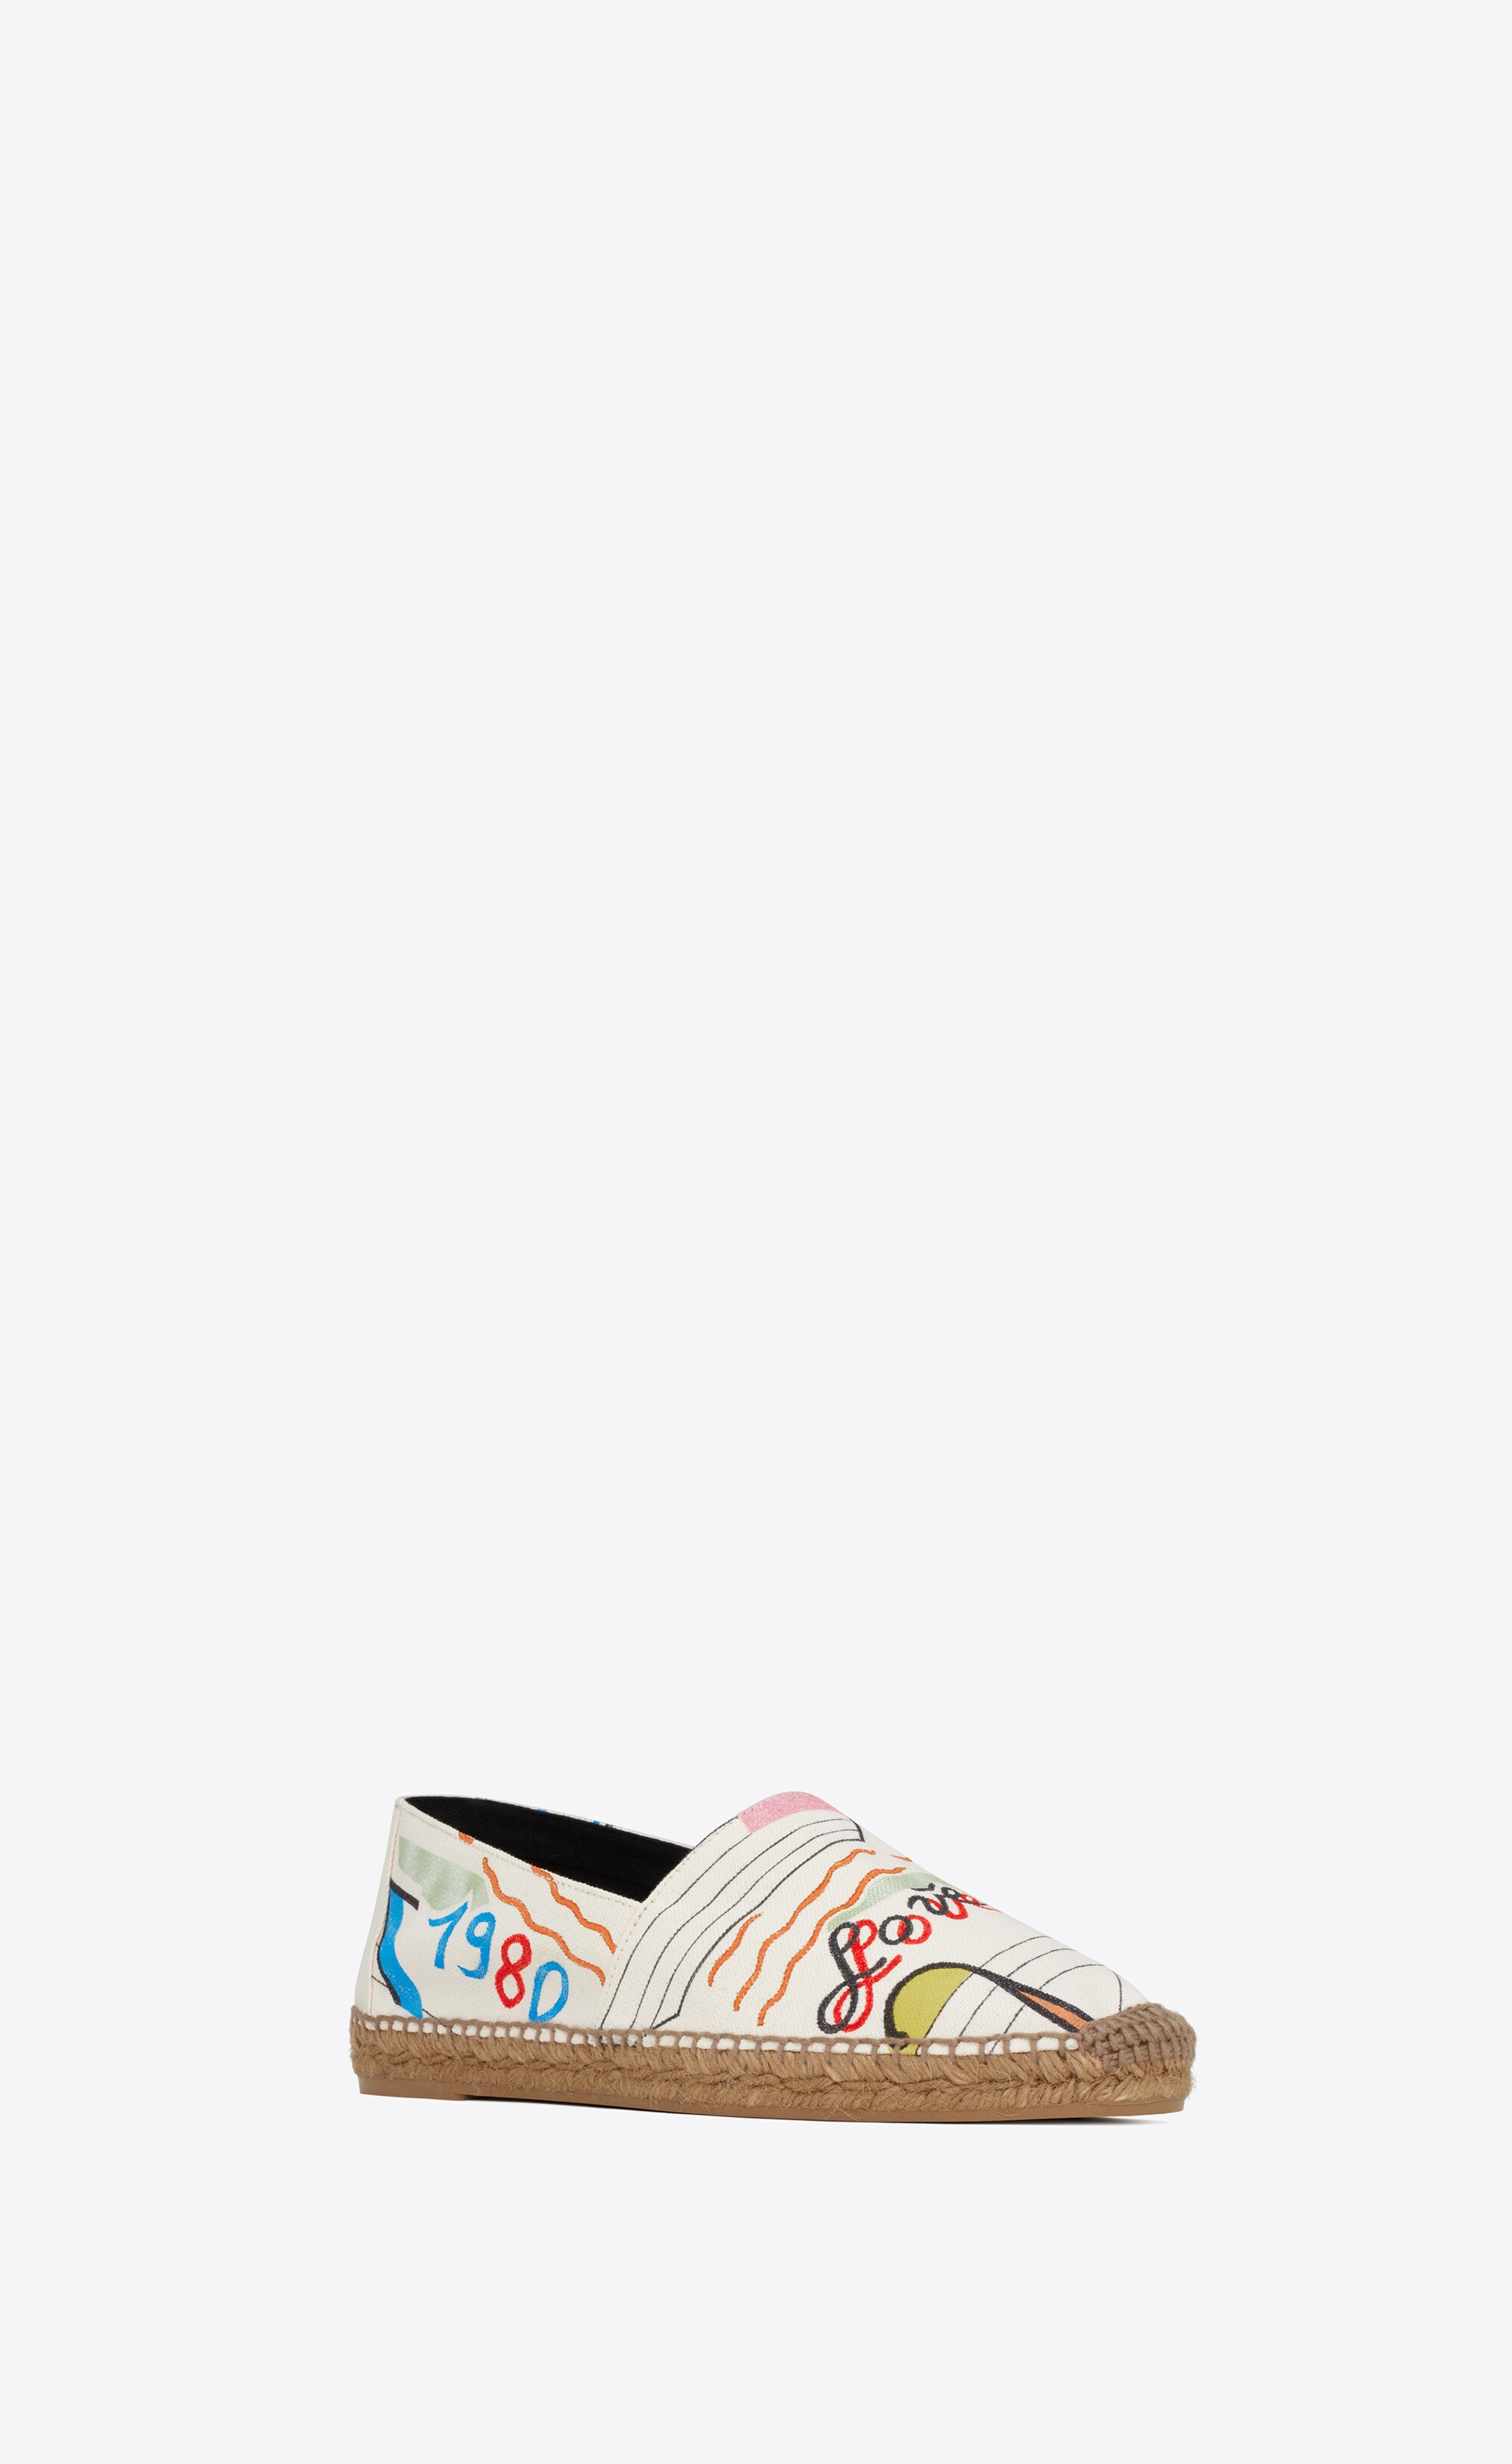 ysl embroidered espadrilles in love 1980-print canvas - 4